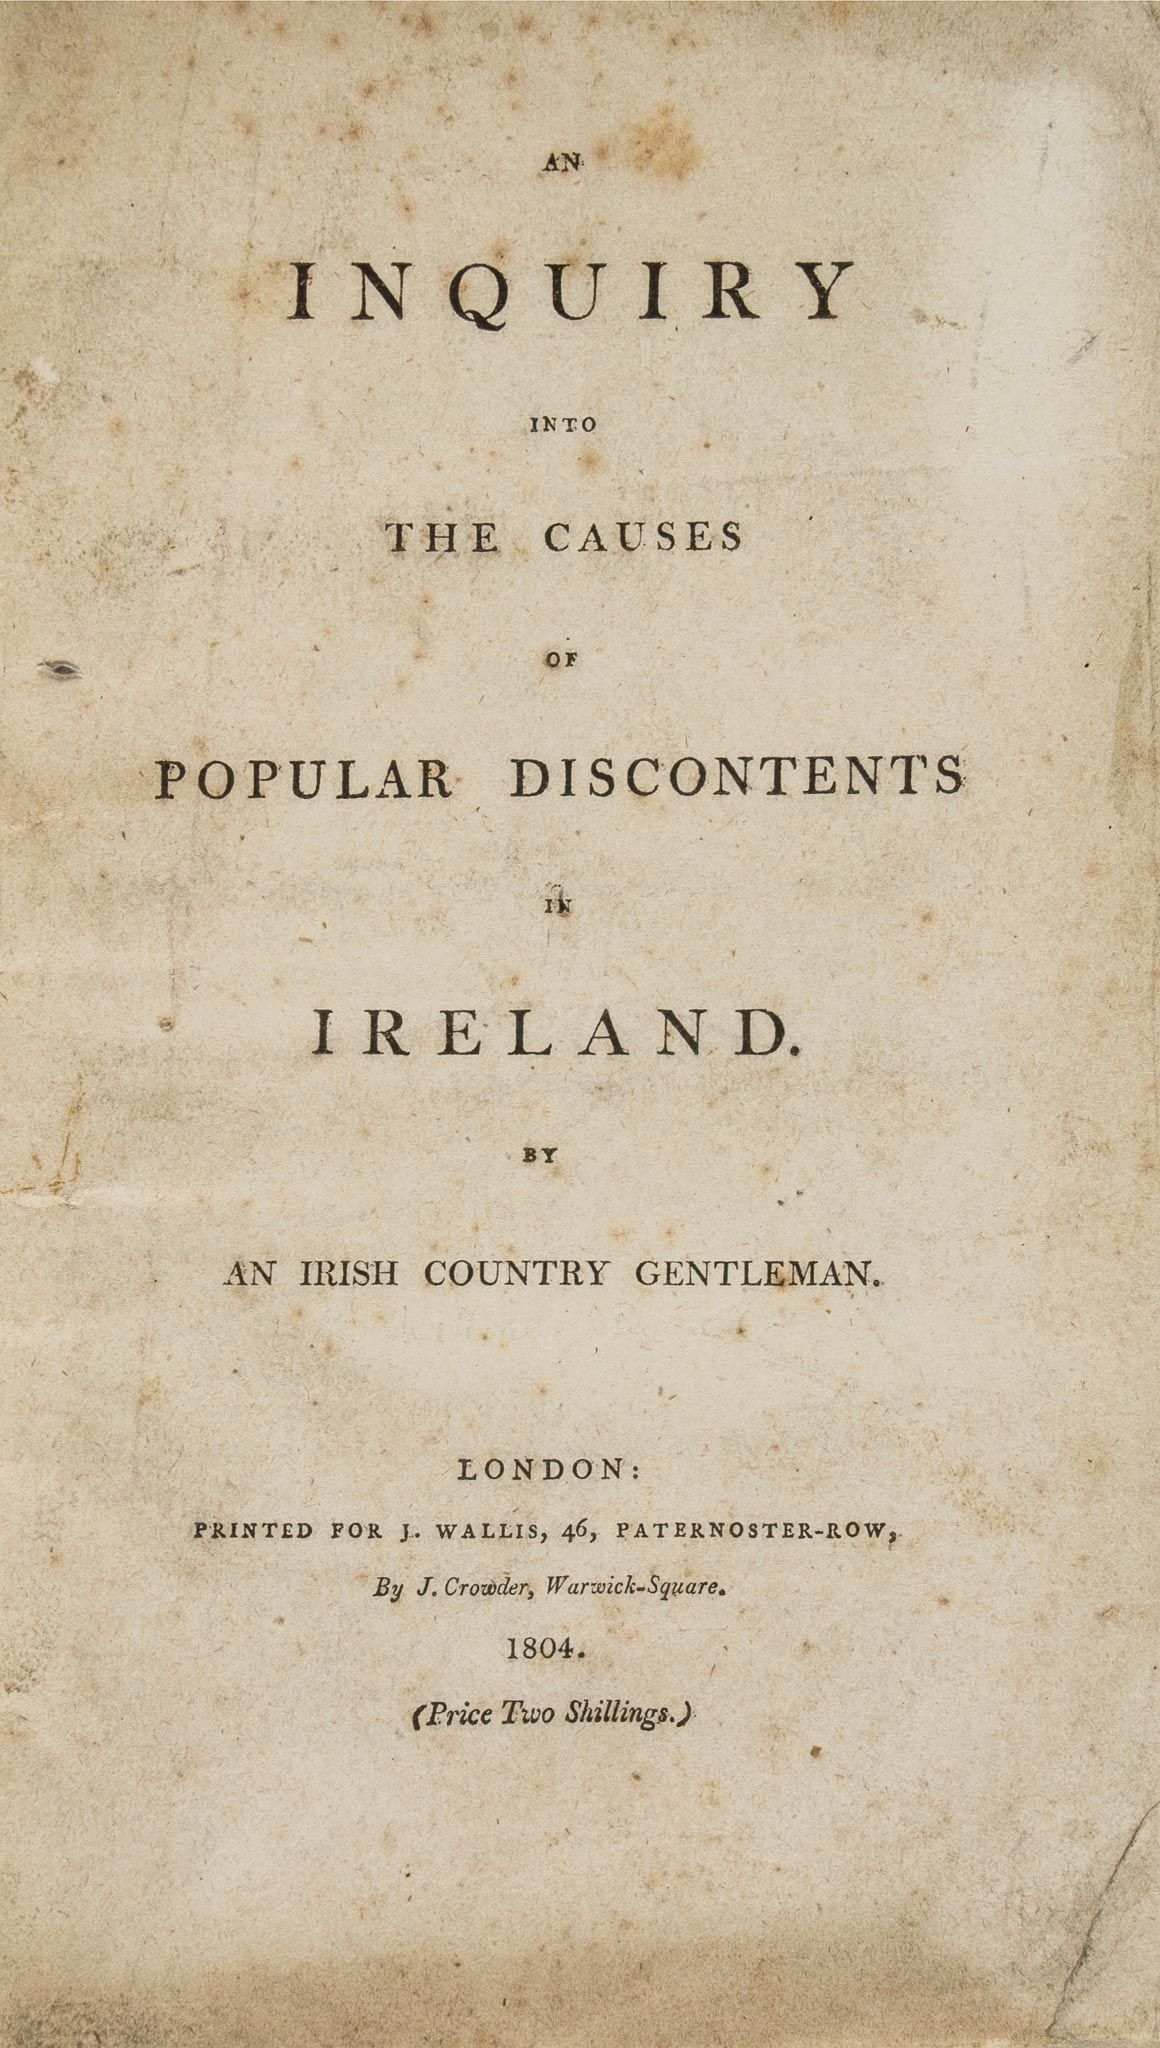 Ireland.- [Parnell (William)] - An Inquiry into the Causes of Popular Discontents in Ireland,  first